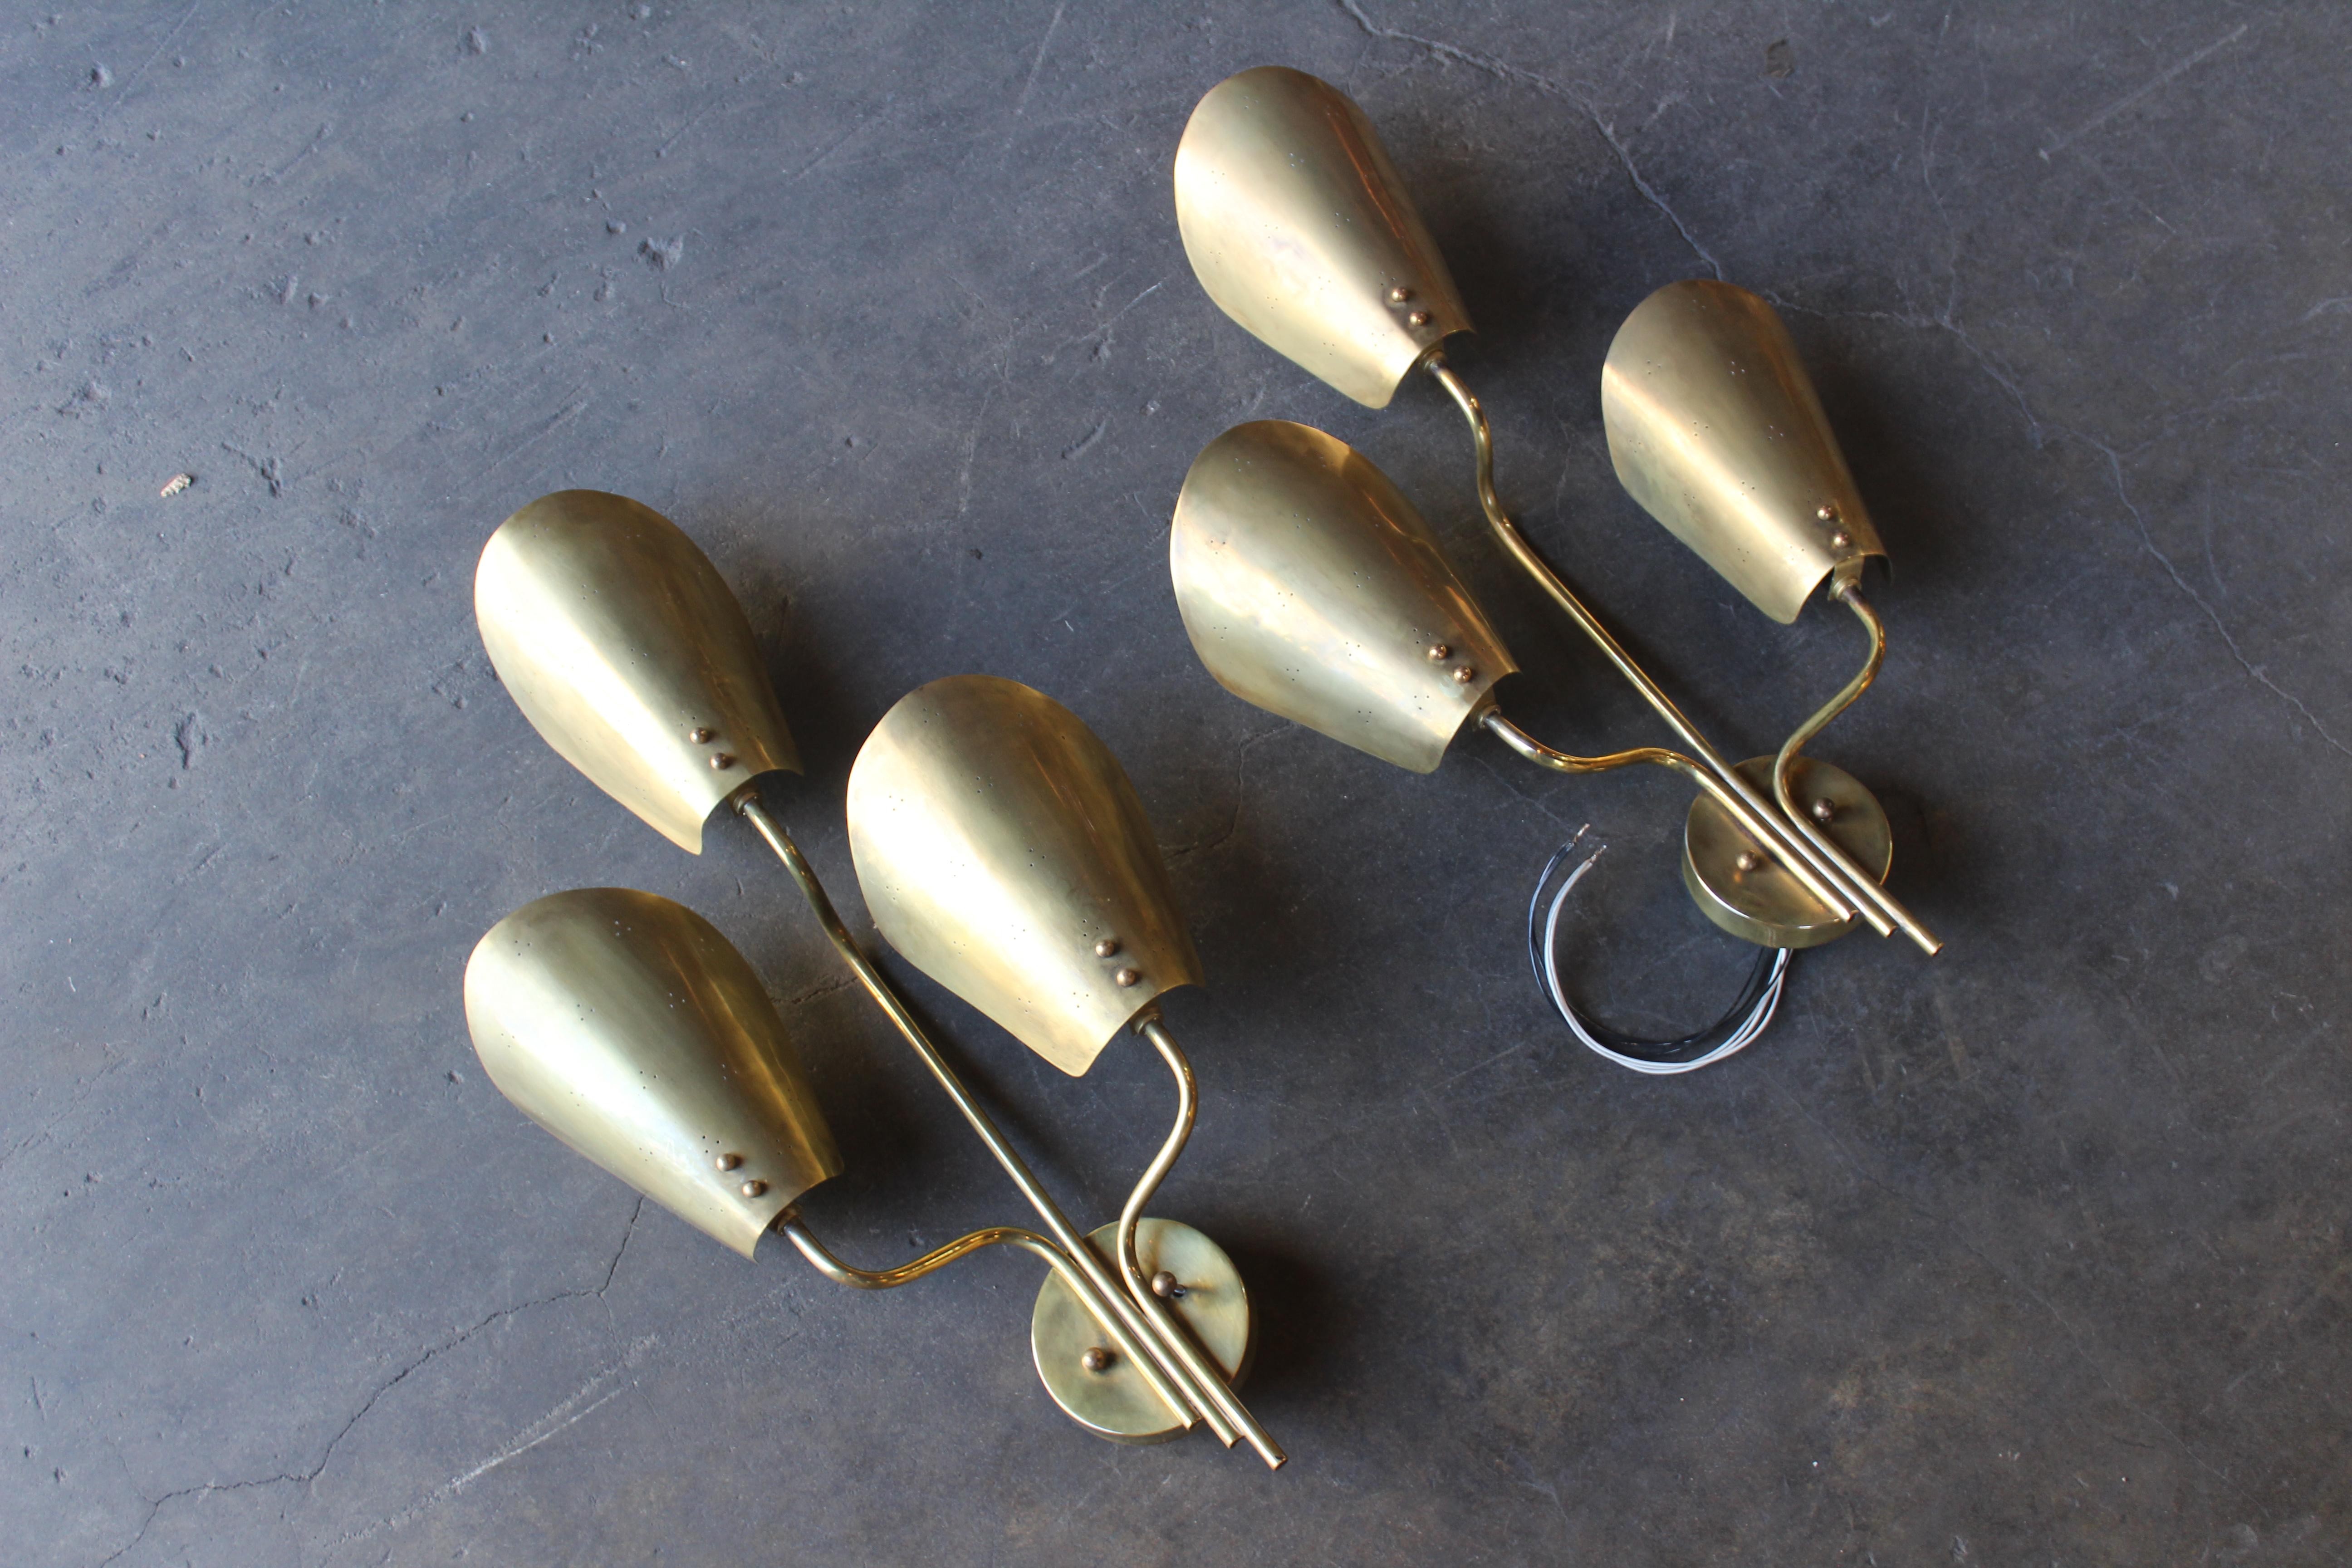 Pair of brass wall sconces designed by Paavo Tynell for Lightolier, U.S.A, 1950s.
Newly rewired and ready to be installed!
Minor age appropriate patina to the brass.